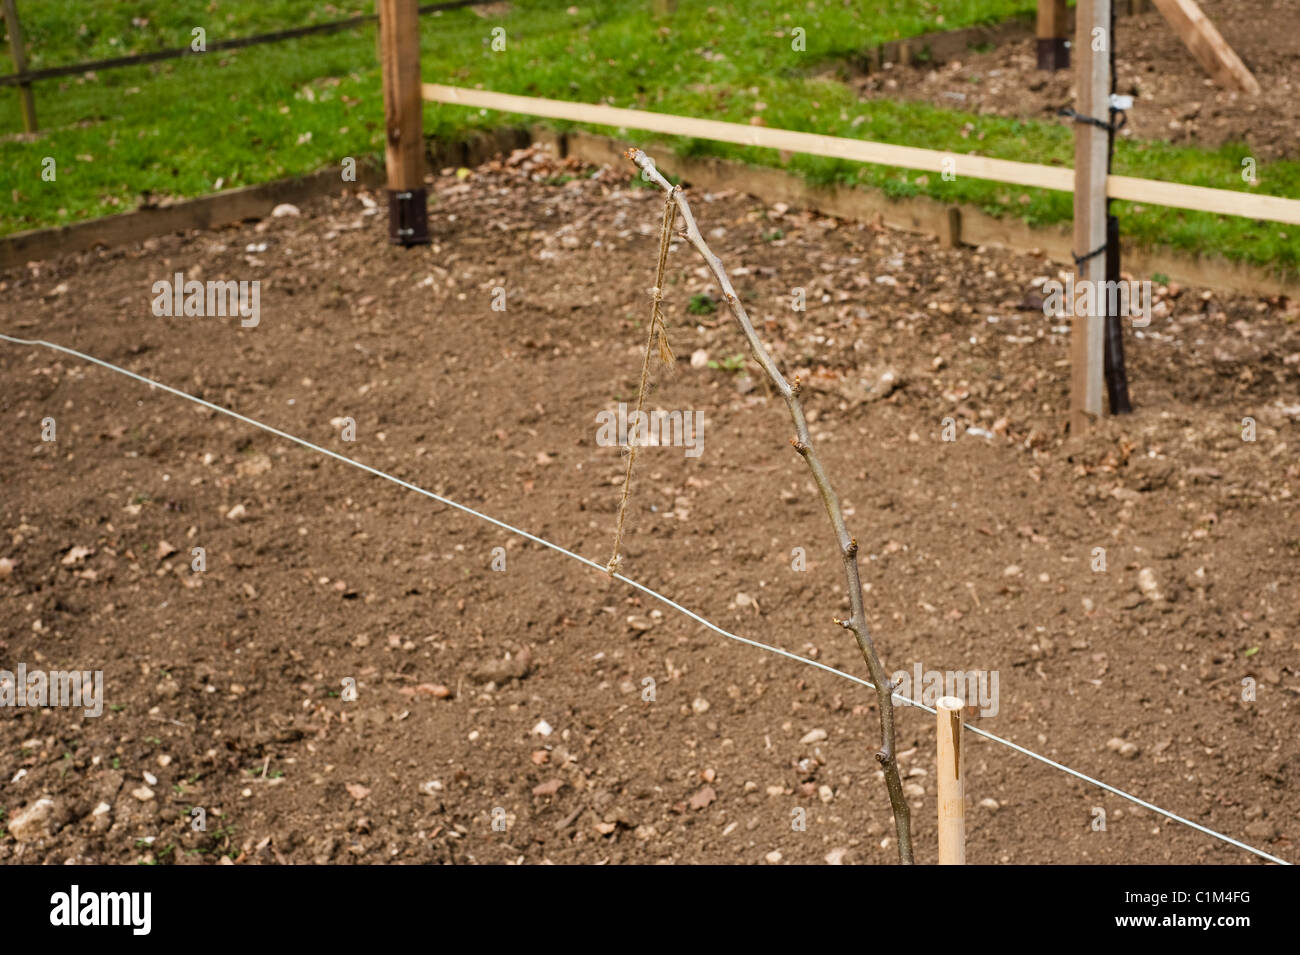 Newly planted Pear, Pyrus communis ‘Doyenne du Comice’, on a Step-Over in the Fruit Training Borders at Painswick Rococo Garden Stock Photo